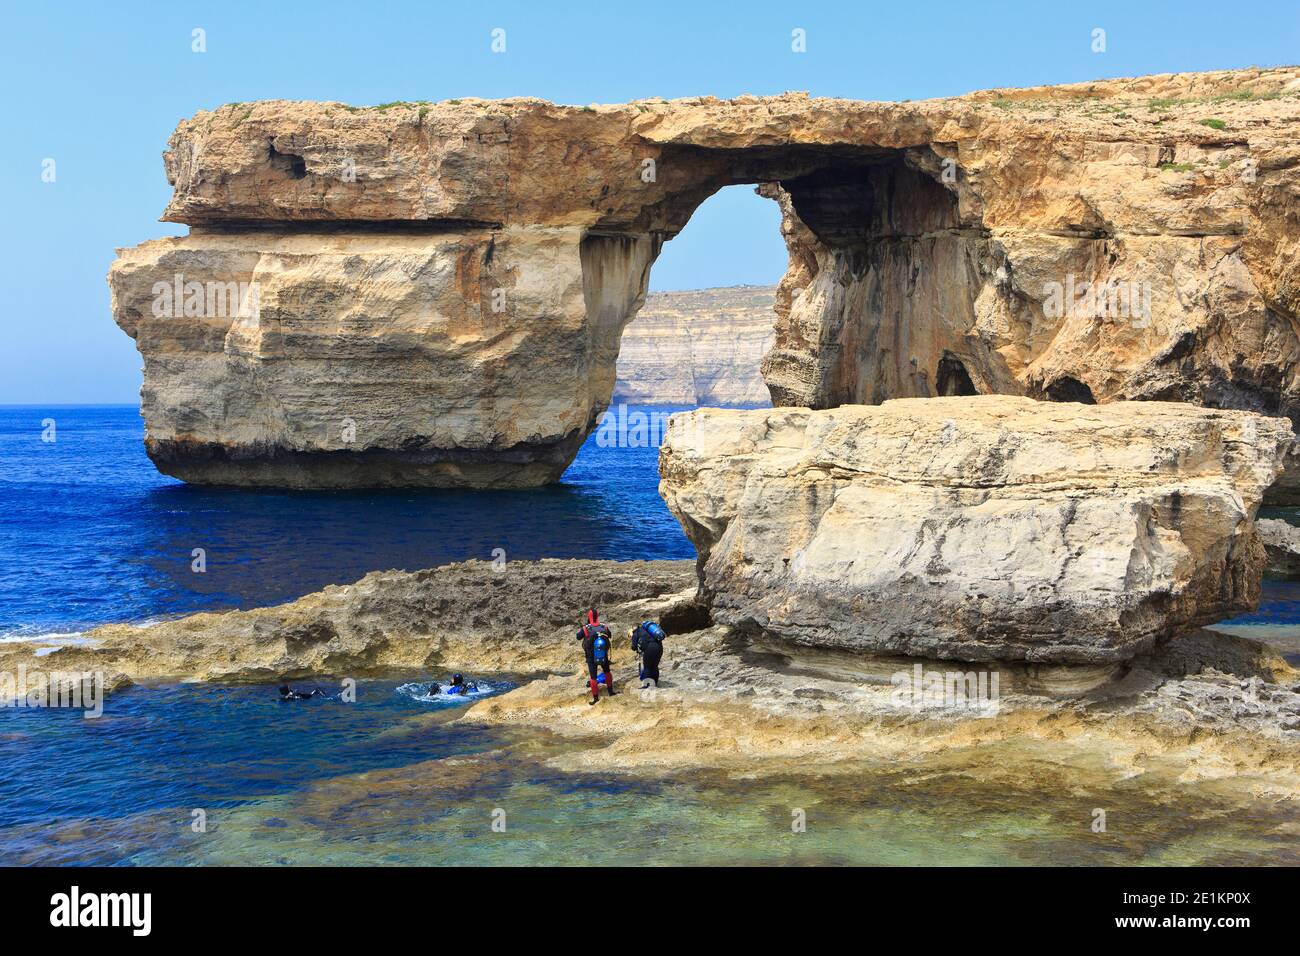 Scuba divers coming up afte a dive around the Azure Window on the Island of Gozo in Malta Stock Photo